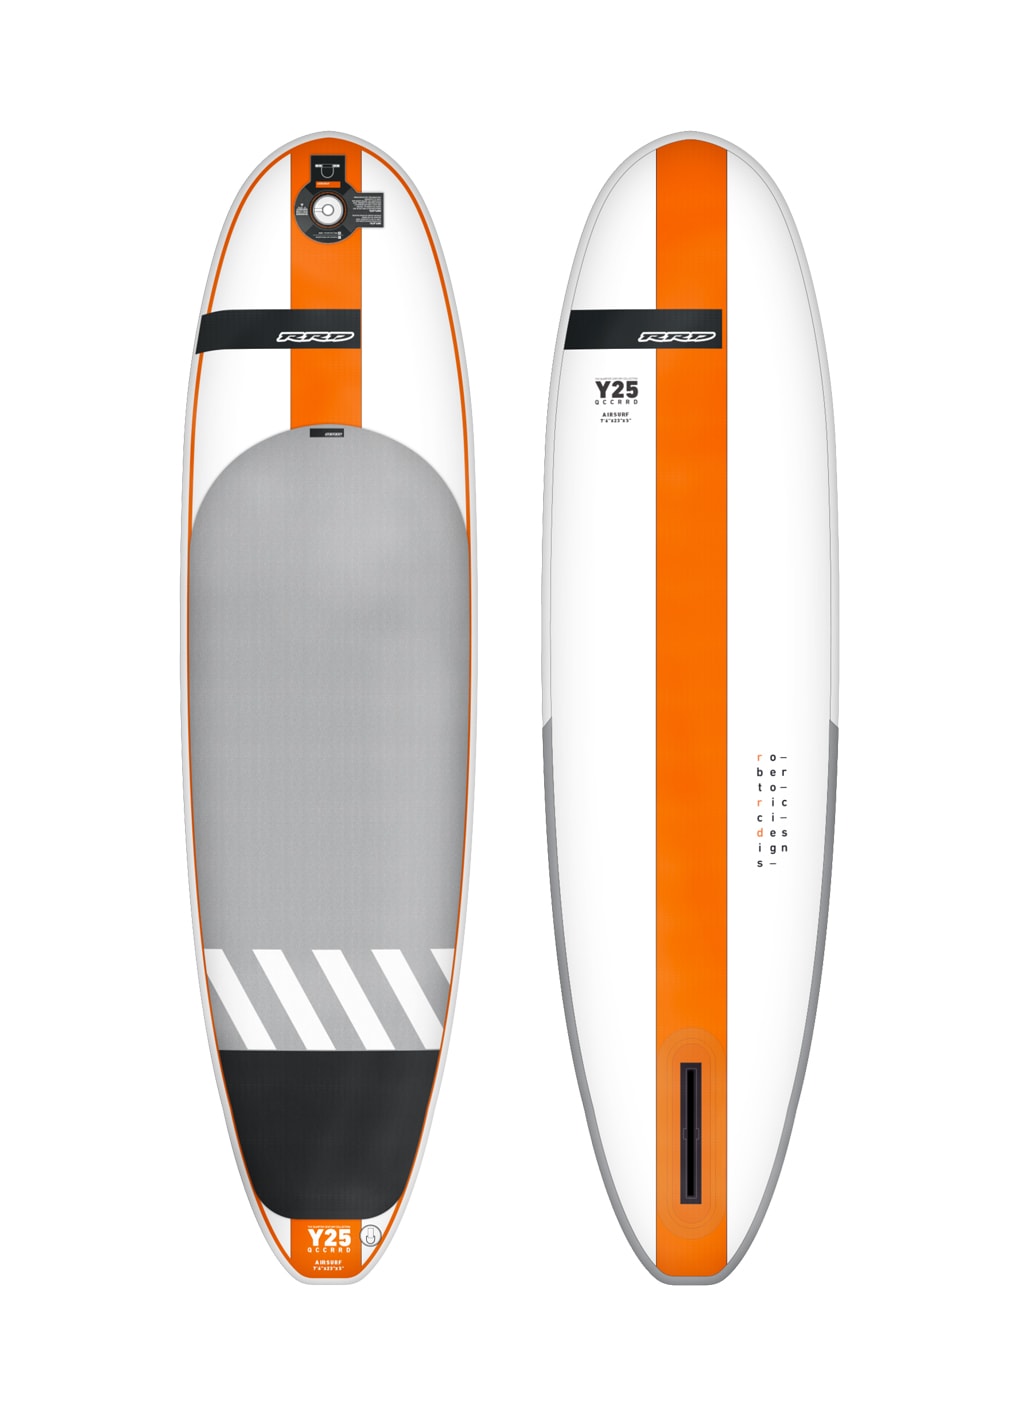 RRD AIRSURF 7.6 Inflatable Surfboard in water